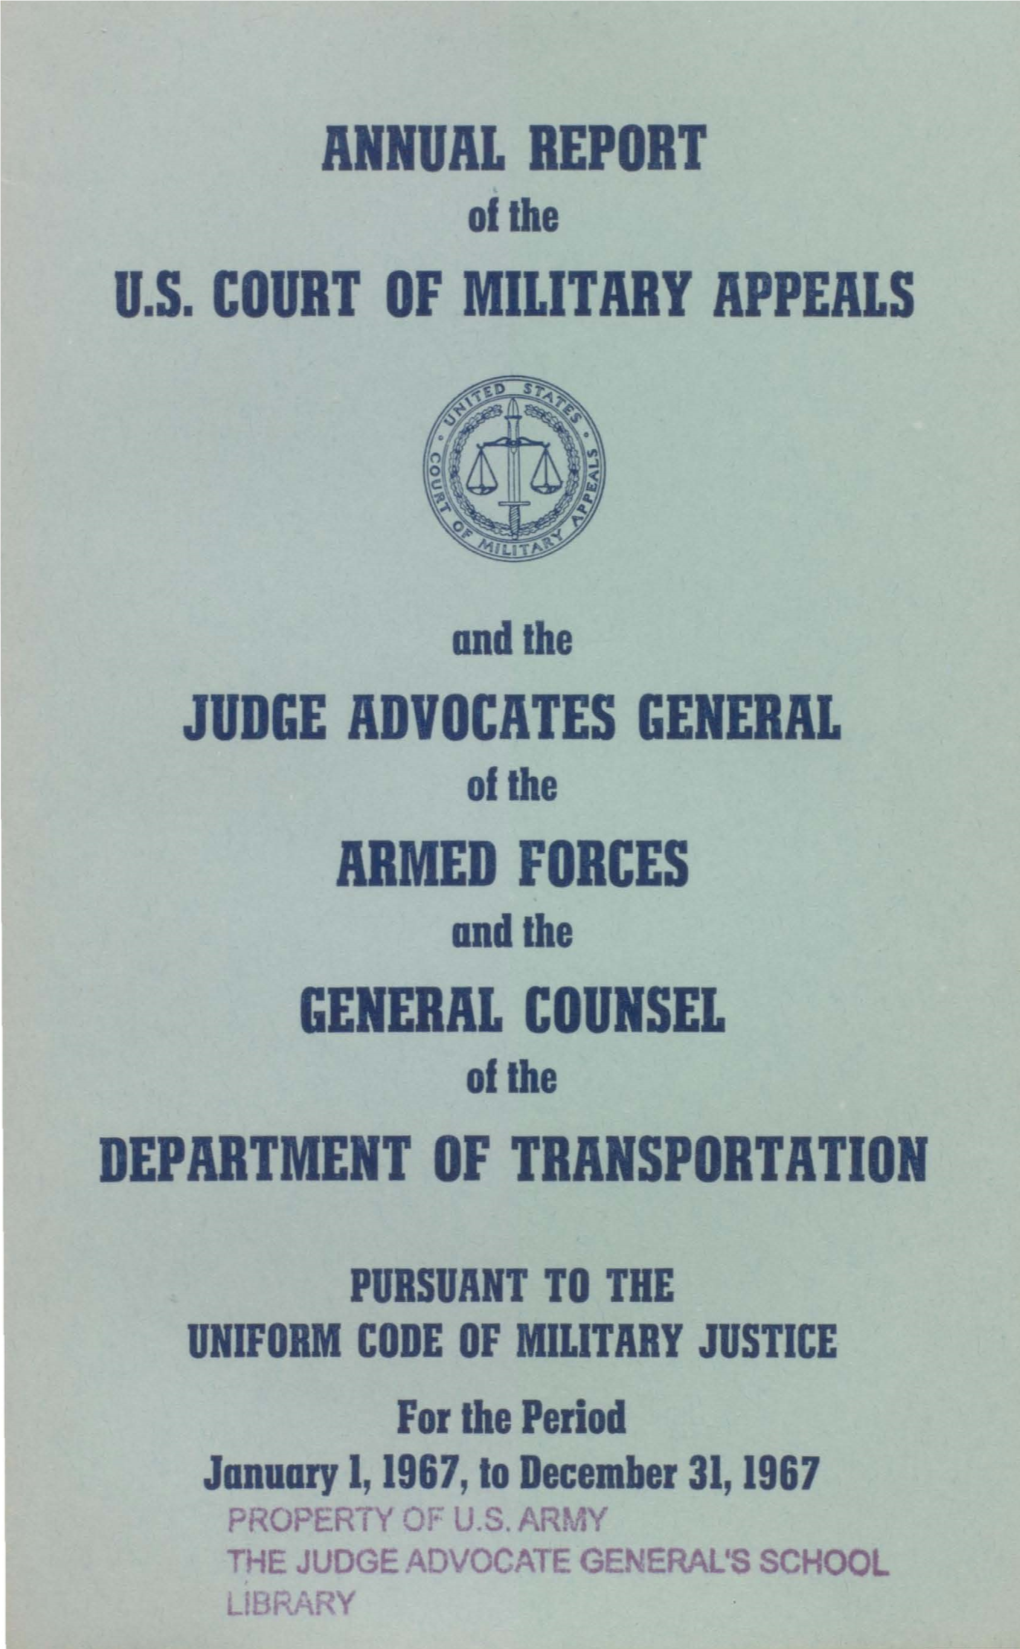 Annual Reports of the United States Court of Military Appeals and The